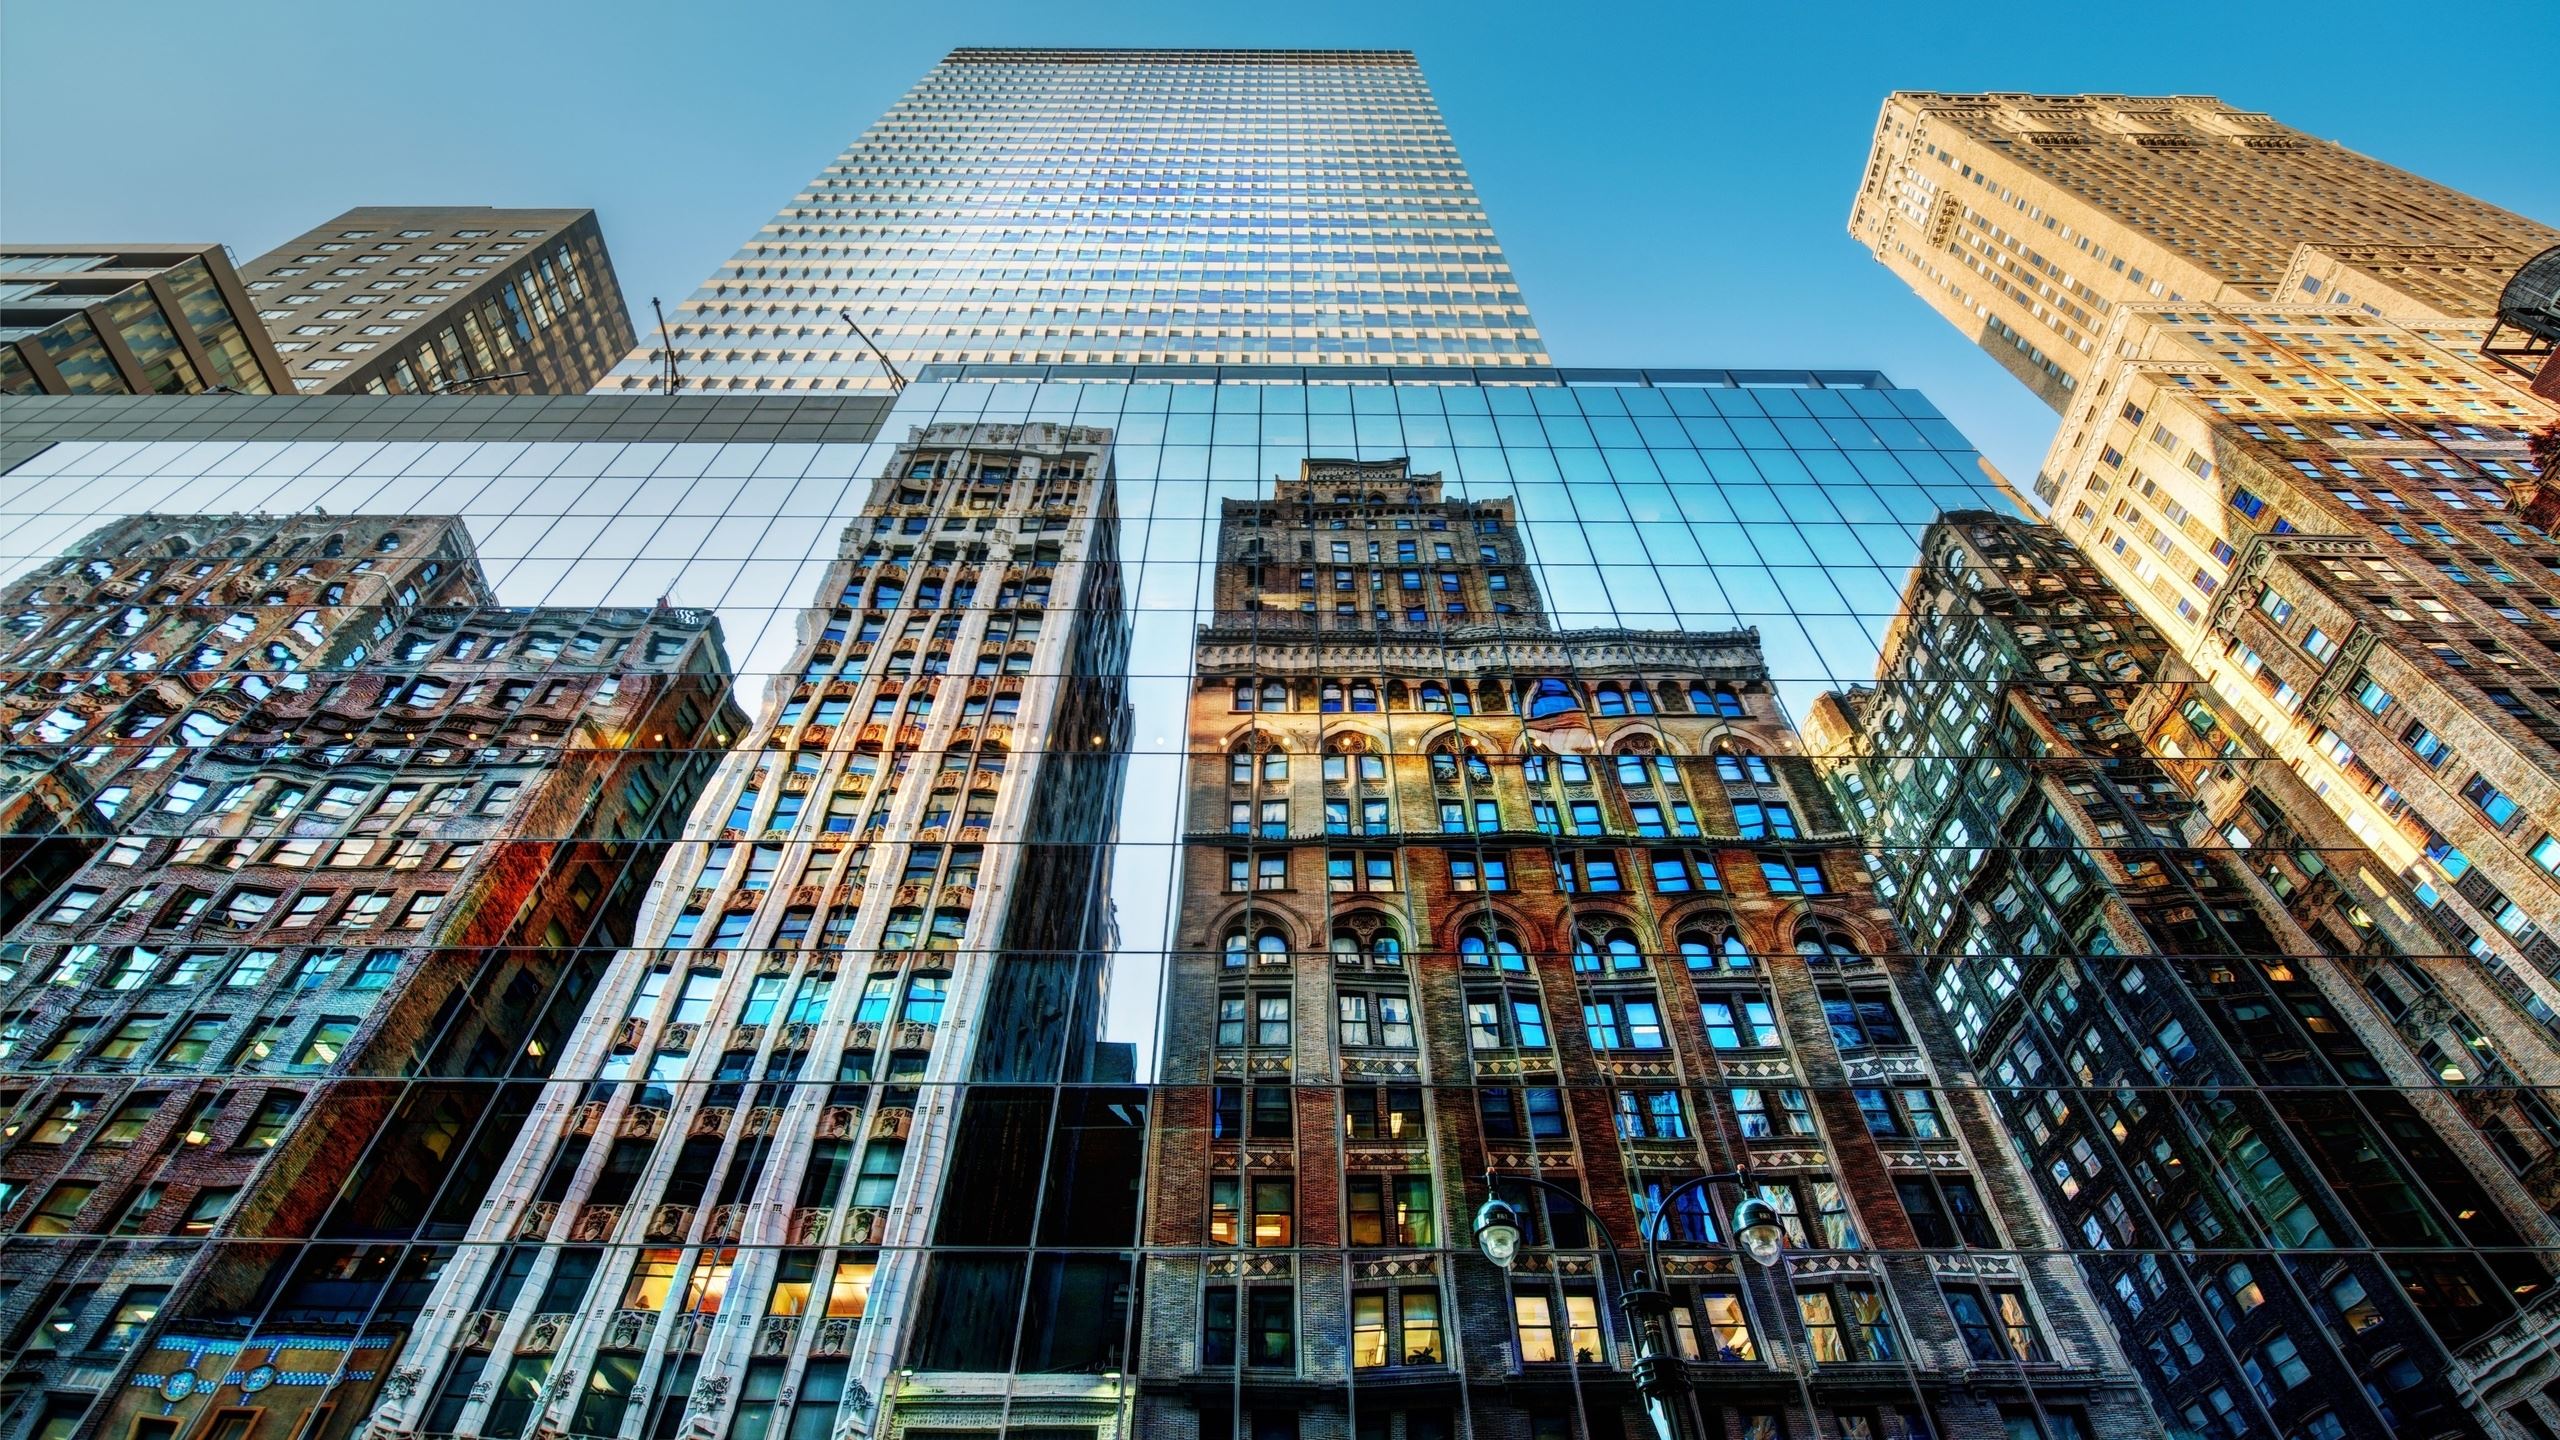 General 2560x1440 cityscape building reflection New York City worm's eye view low-angle